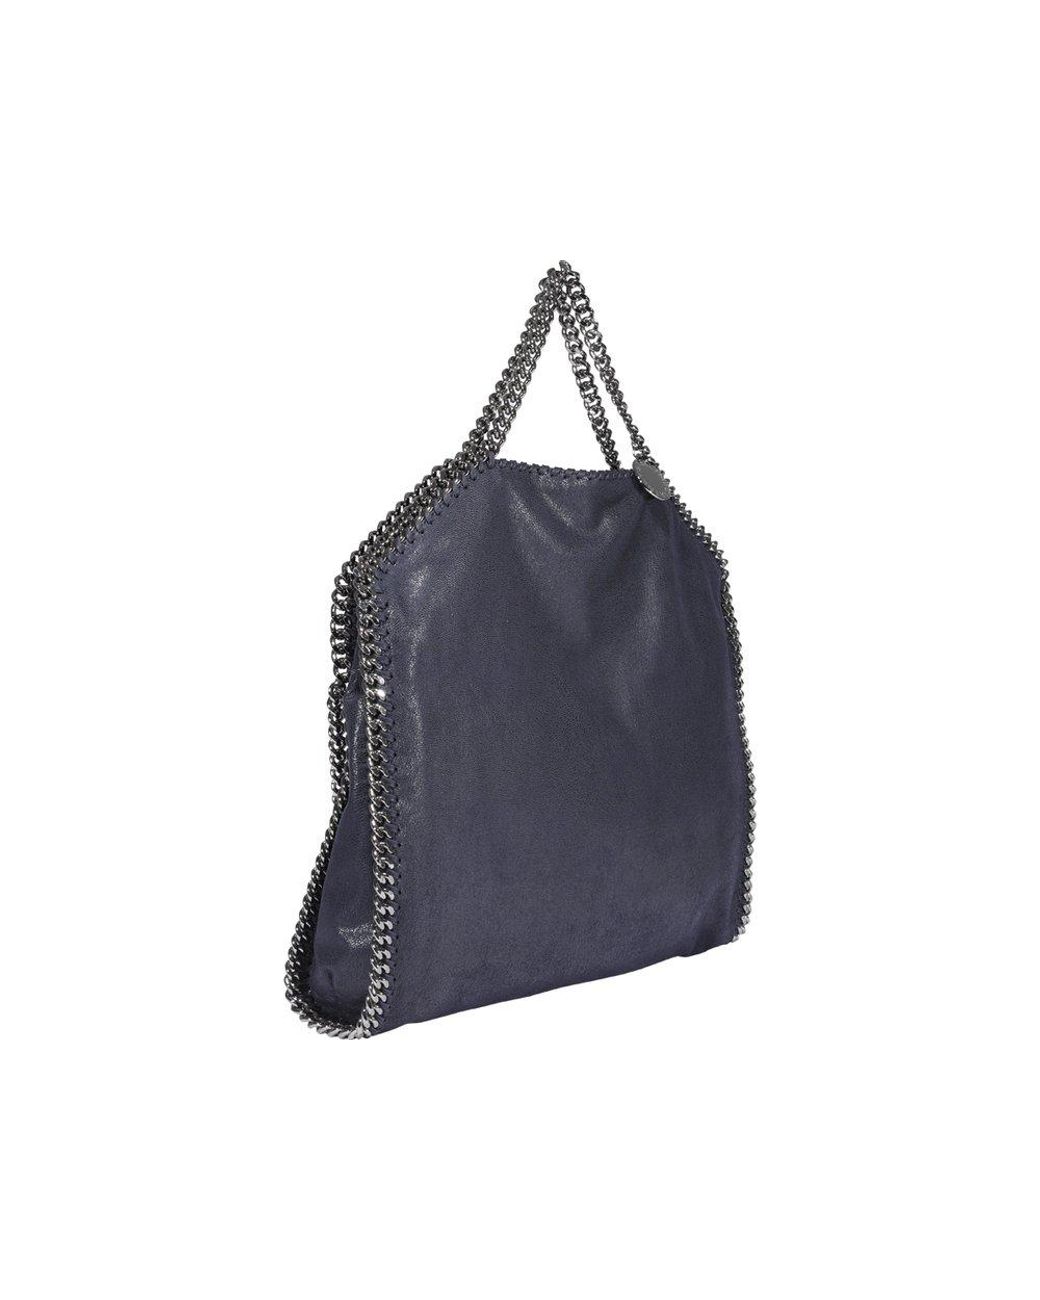 Stella McCartney Synthetic Falabella Fold Over Tote Bag in Navy 